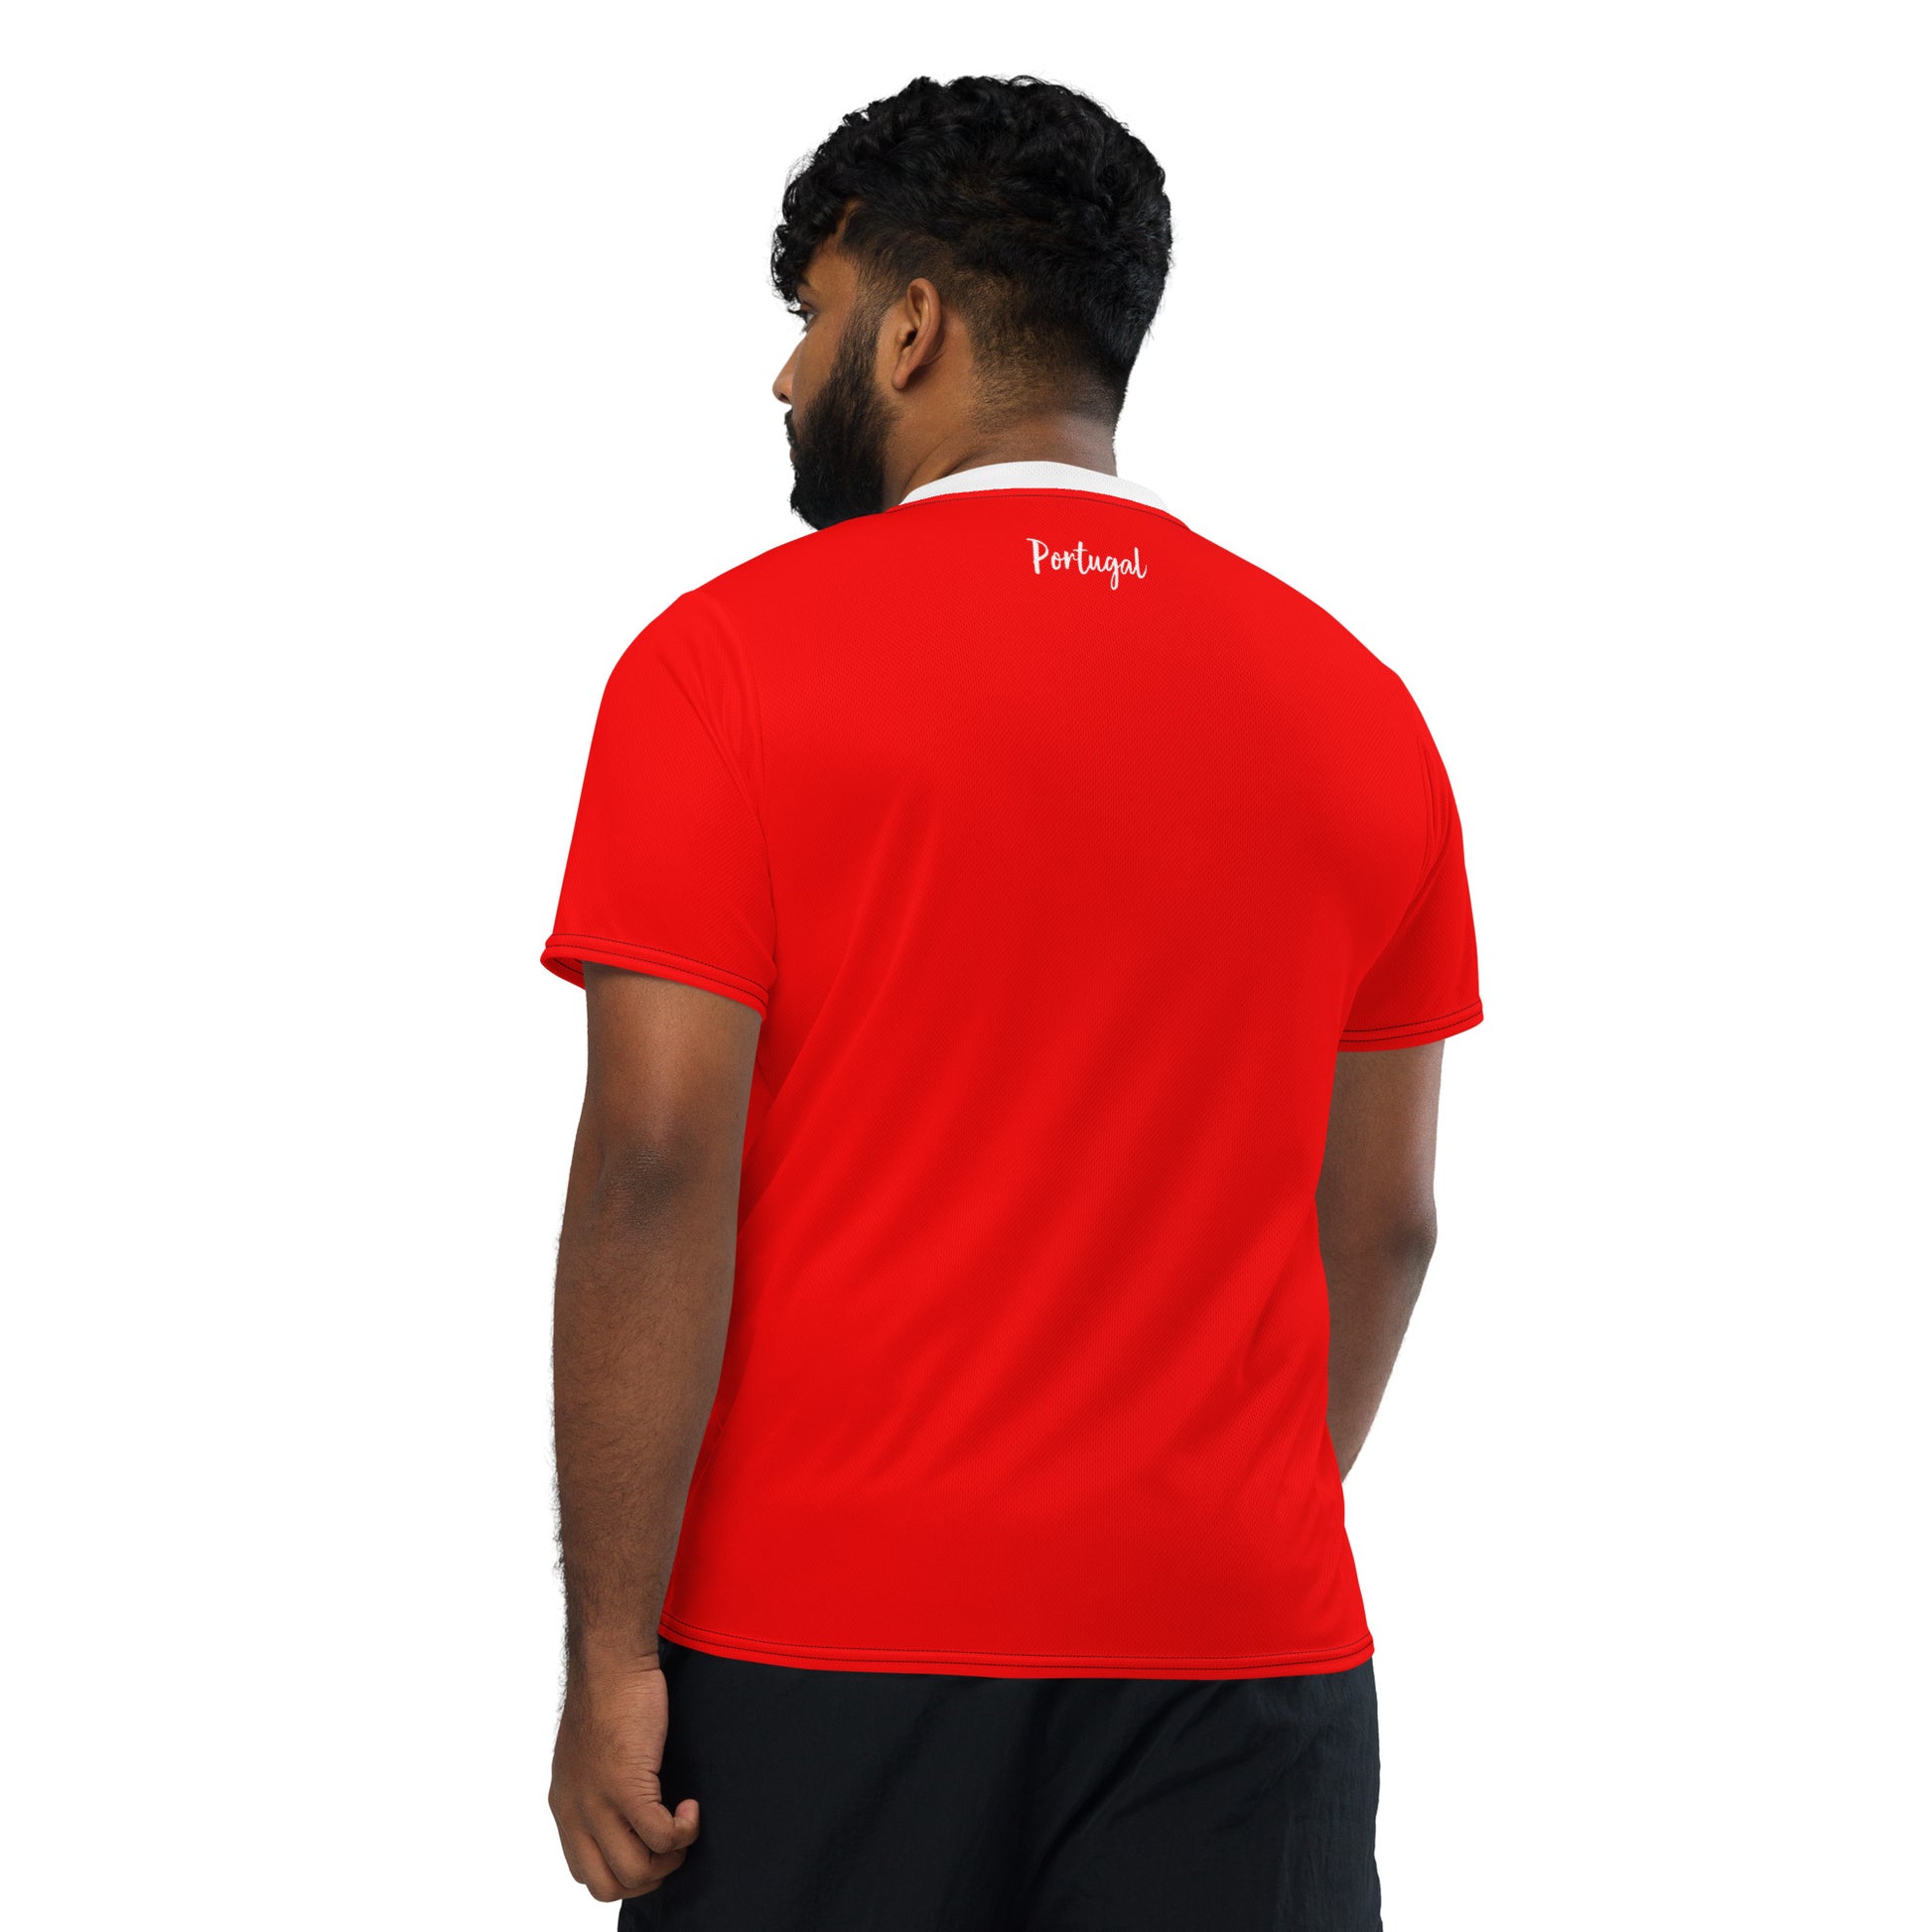 Show your Portuguese pride with this comfortable and stylish jersey (back side)